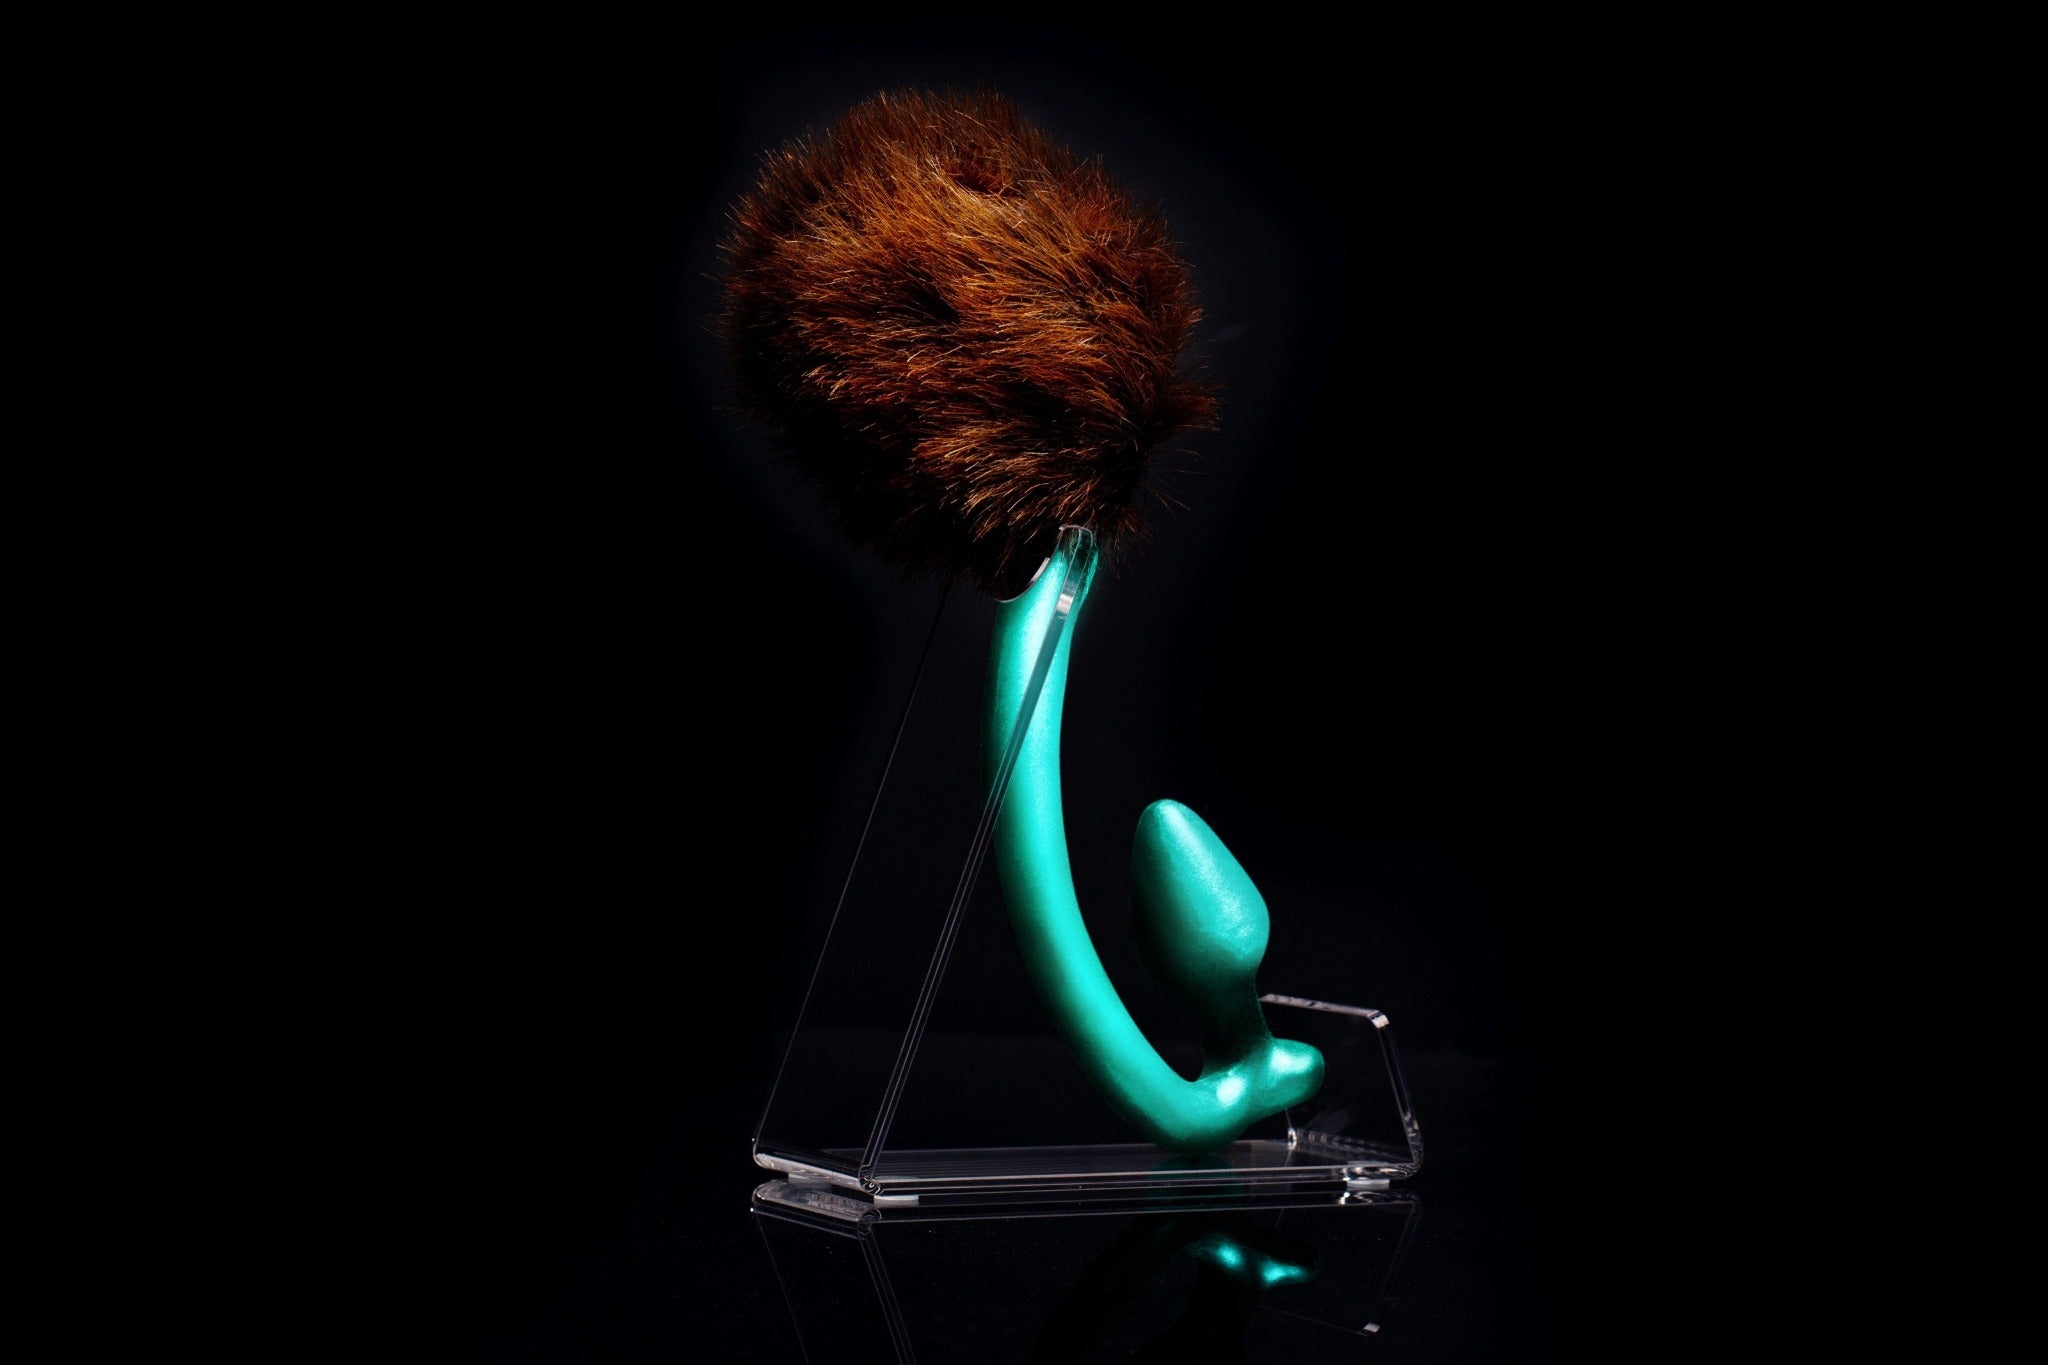 Brown Bear tail butt plug made of silicone and faux fur, but the plug is hooked so when worn, the tail sits at the bottom of the lumbar area. It’s standing up on a transparent stand against an all black background.